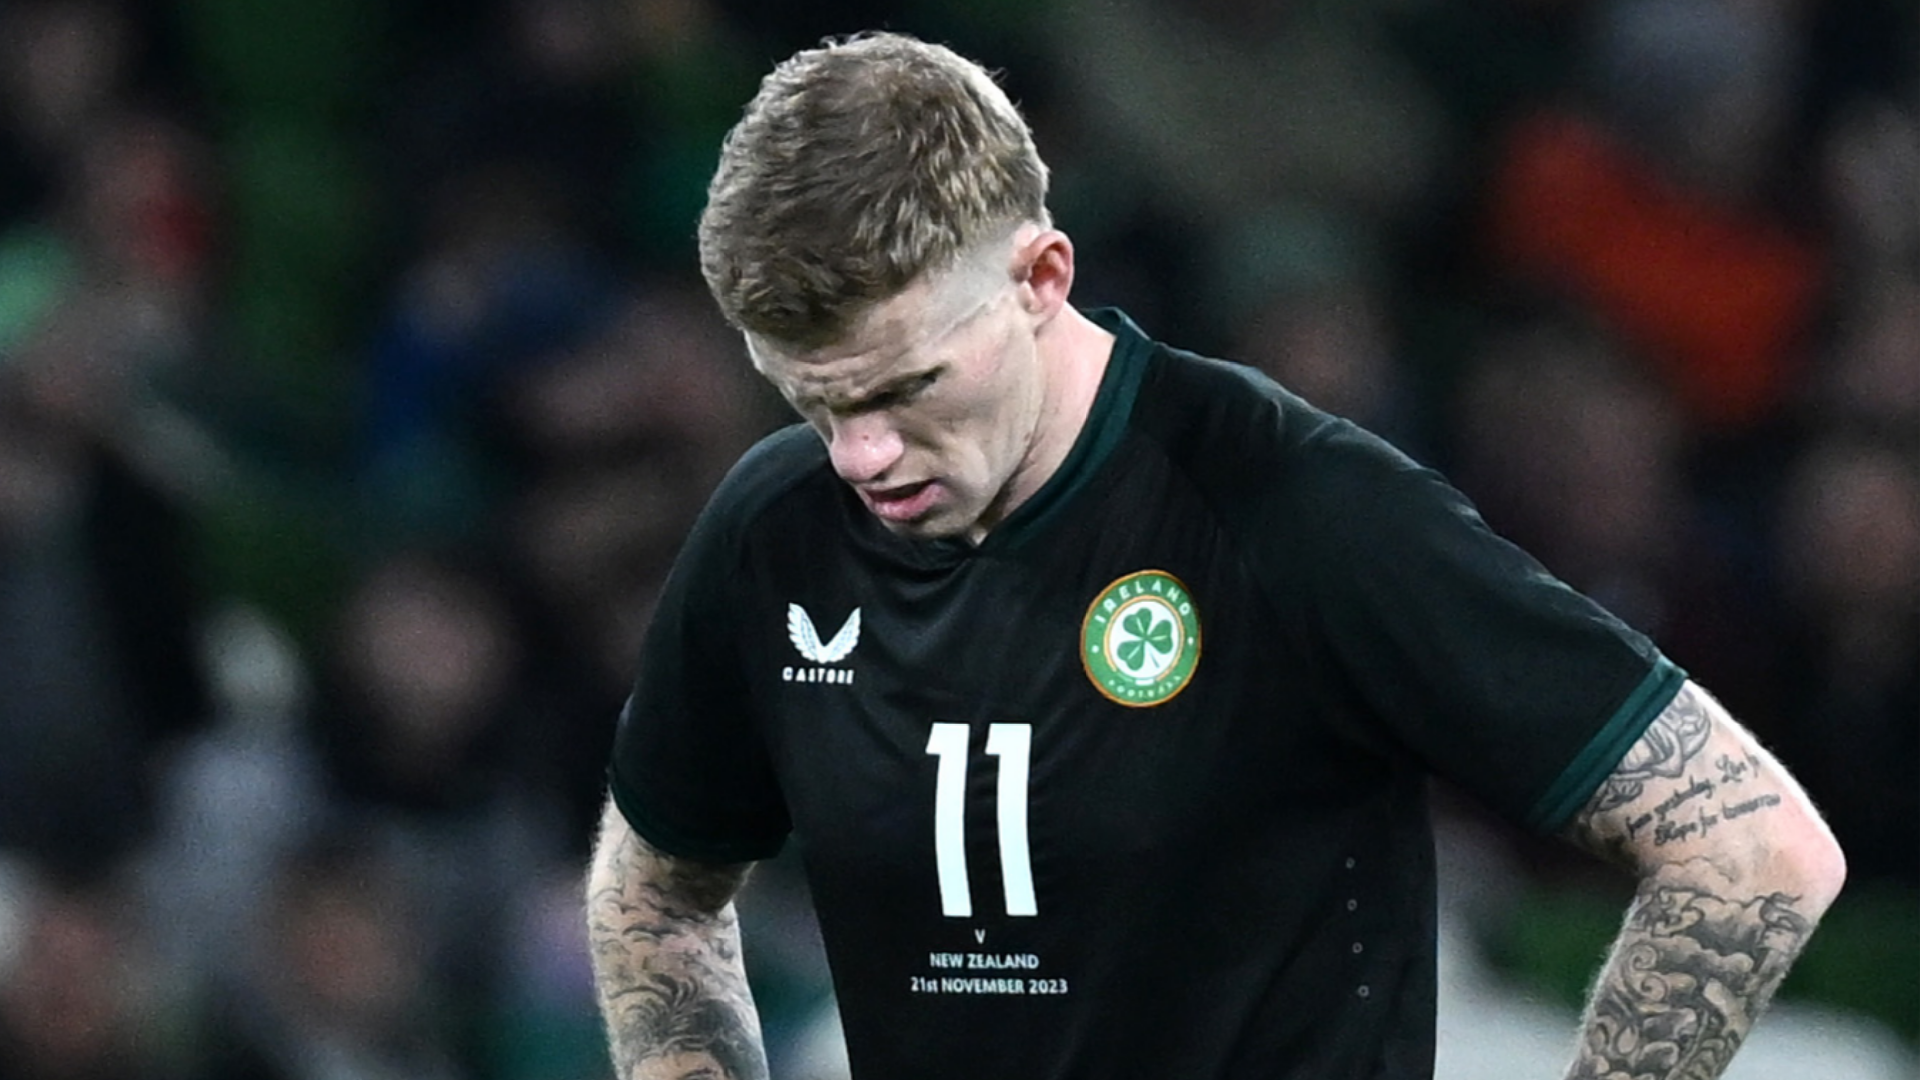 Wrexham star James McClean reveals how 'very disrespectful' phone call about move to Ryan Reynolds and Rob McElhenney's side was 'major factor' in decision to retire from Republic of Ireland duty